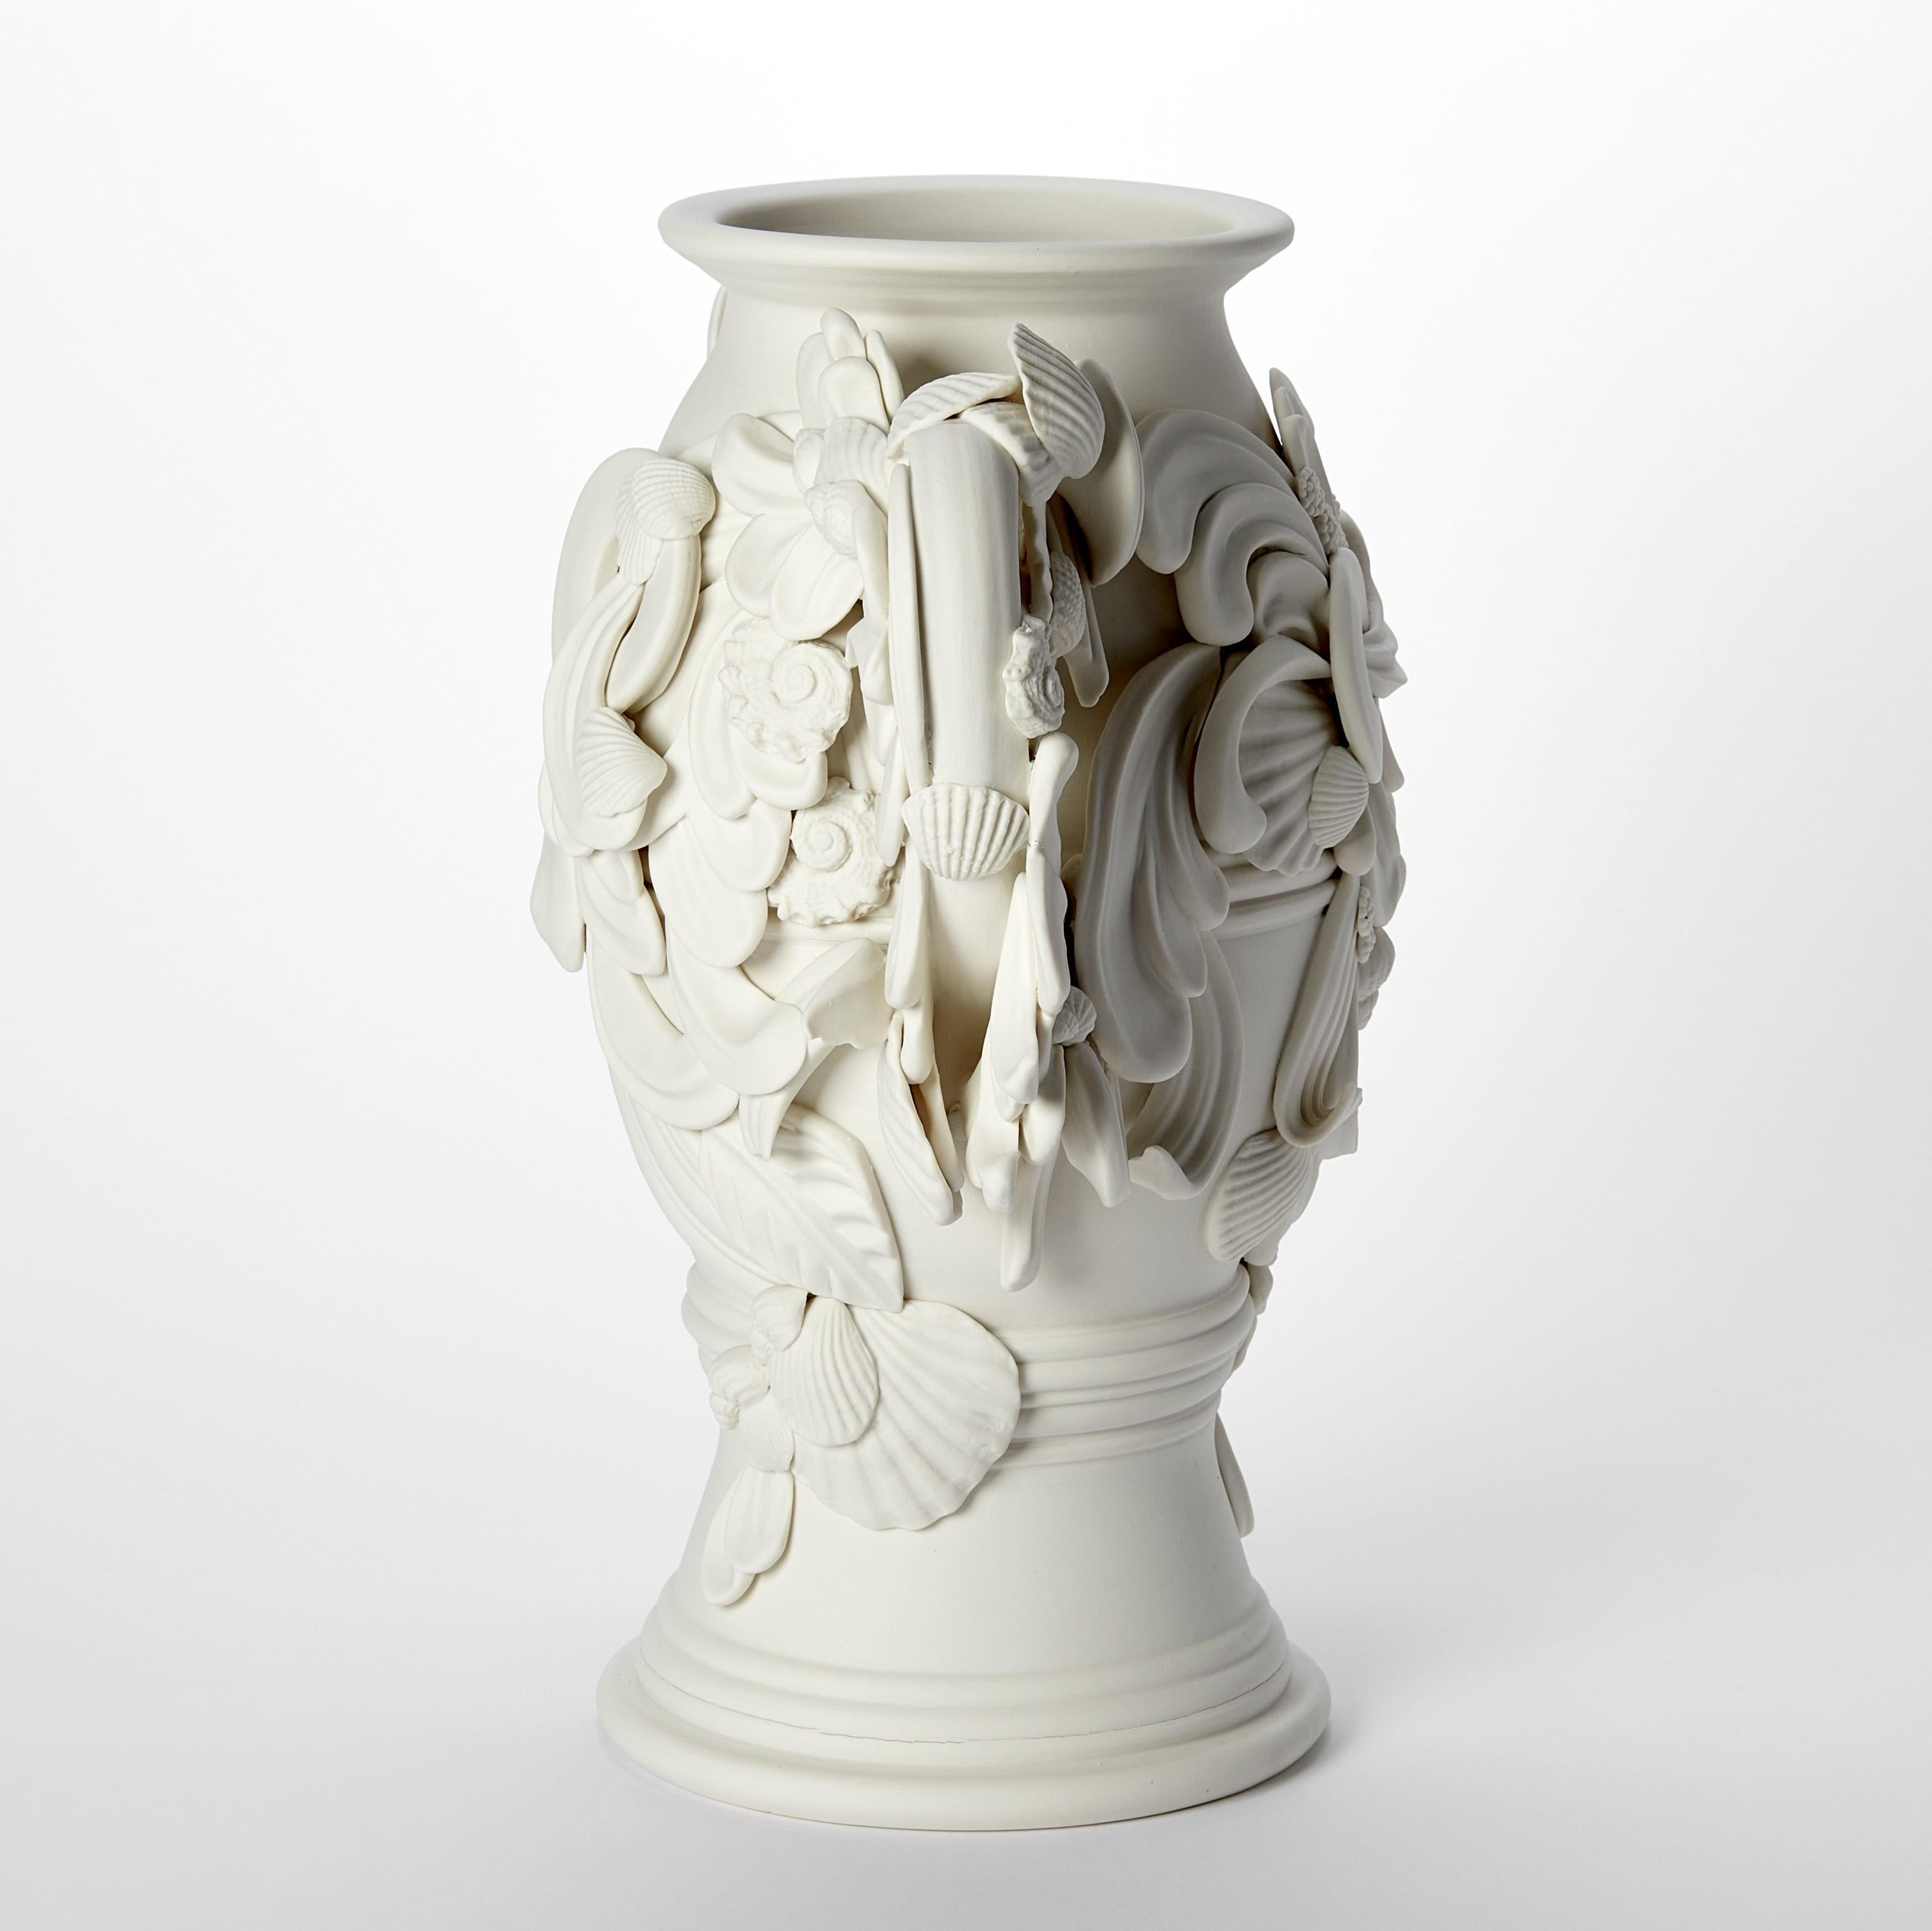 Organic Modern Rocaille IV, rococo inspired porcelain vessel with swirls & shells by Jo Taylor For Sale